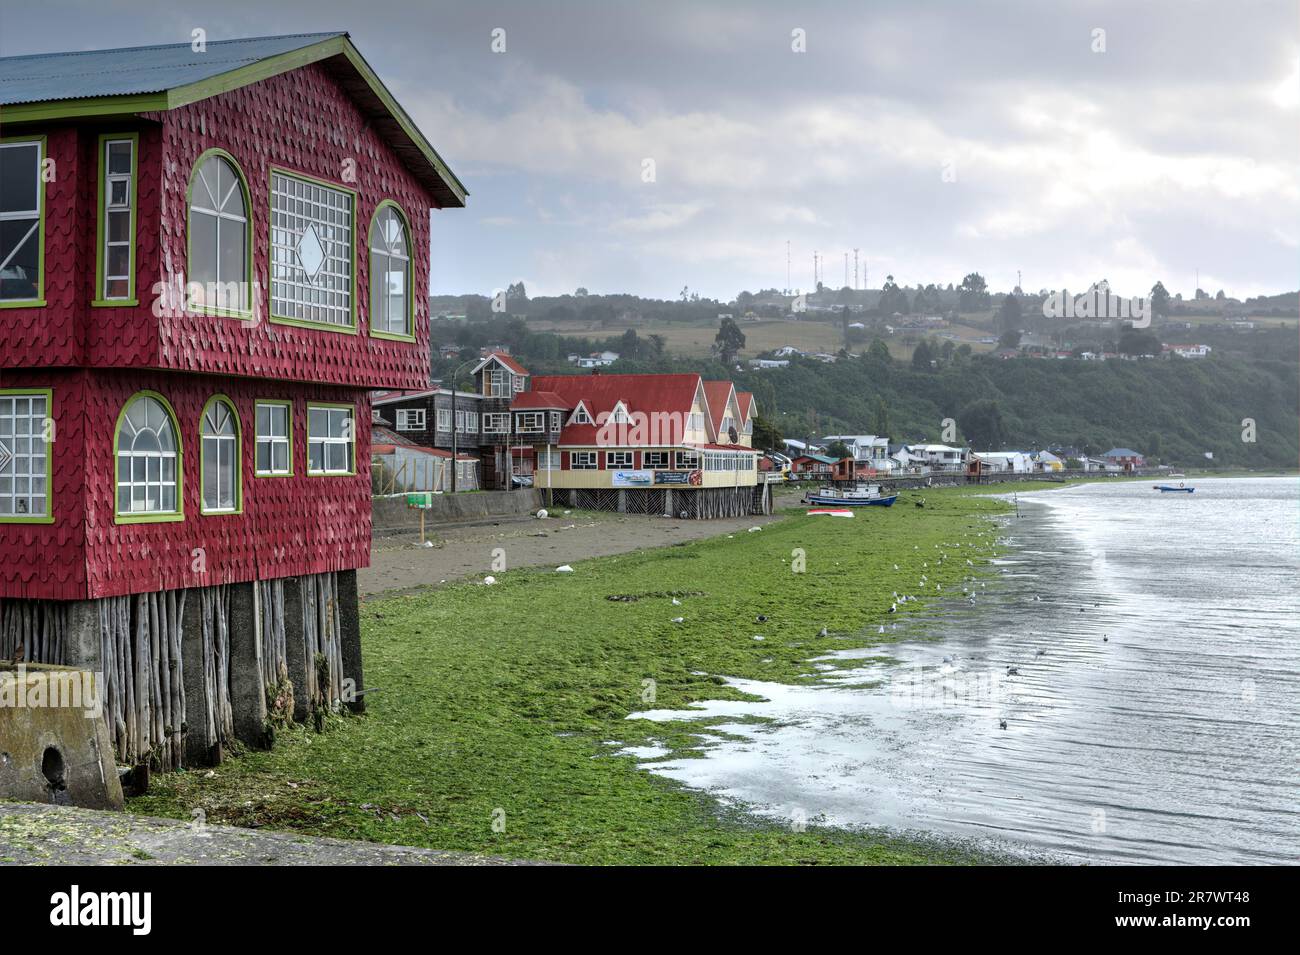 The Palafitos of Chiloe - colorful wooden houses on stilts along the river, Castro, Chiloe Island, Chile Stock Photo